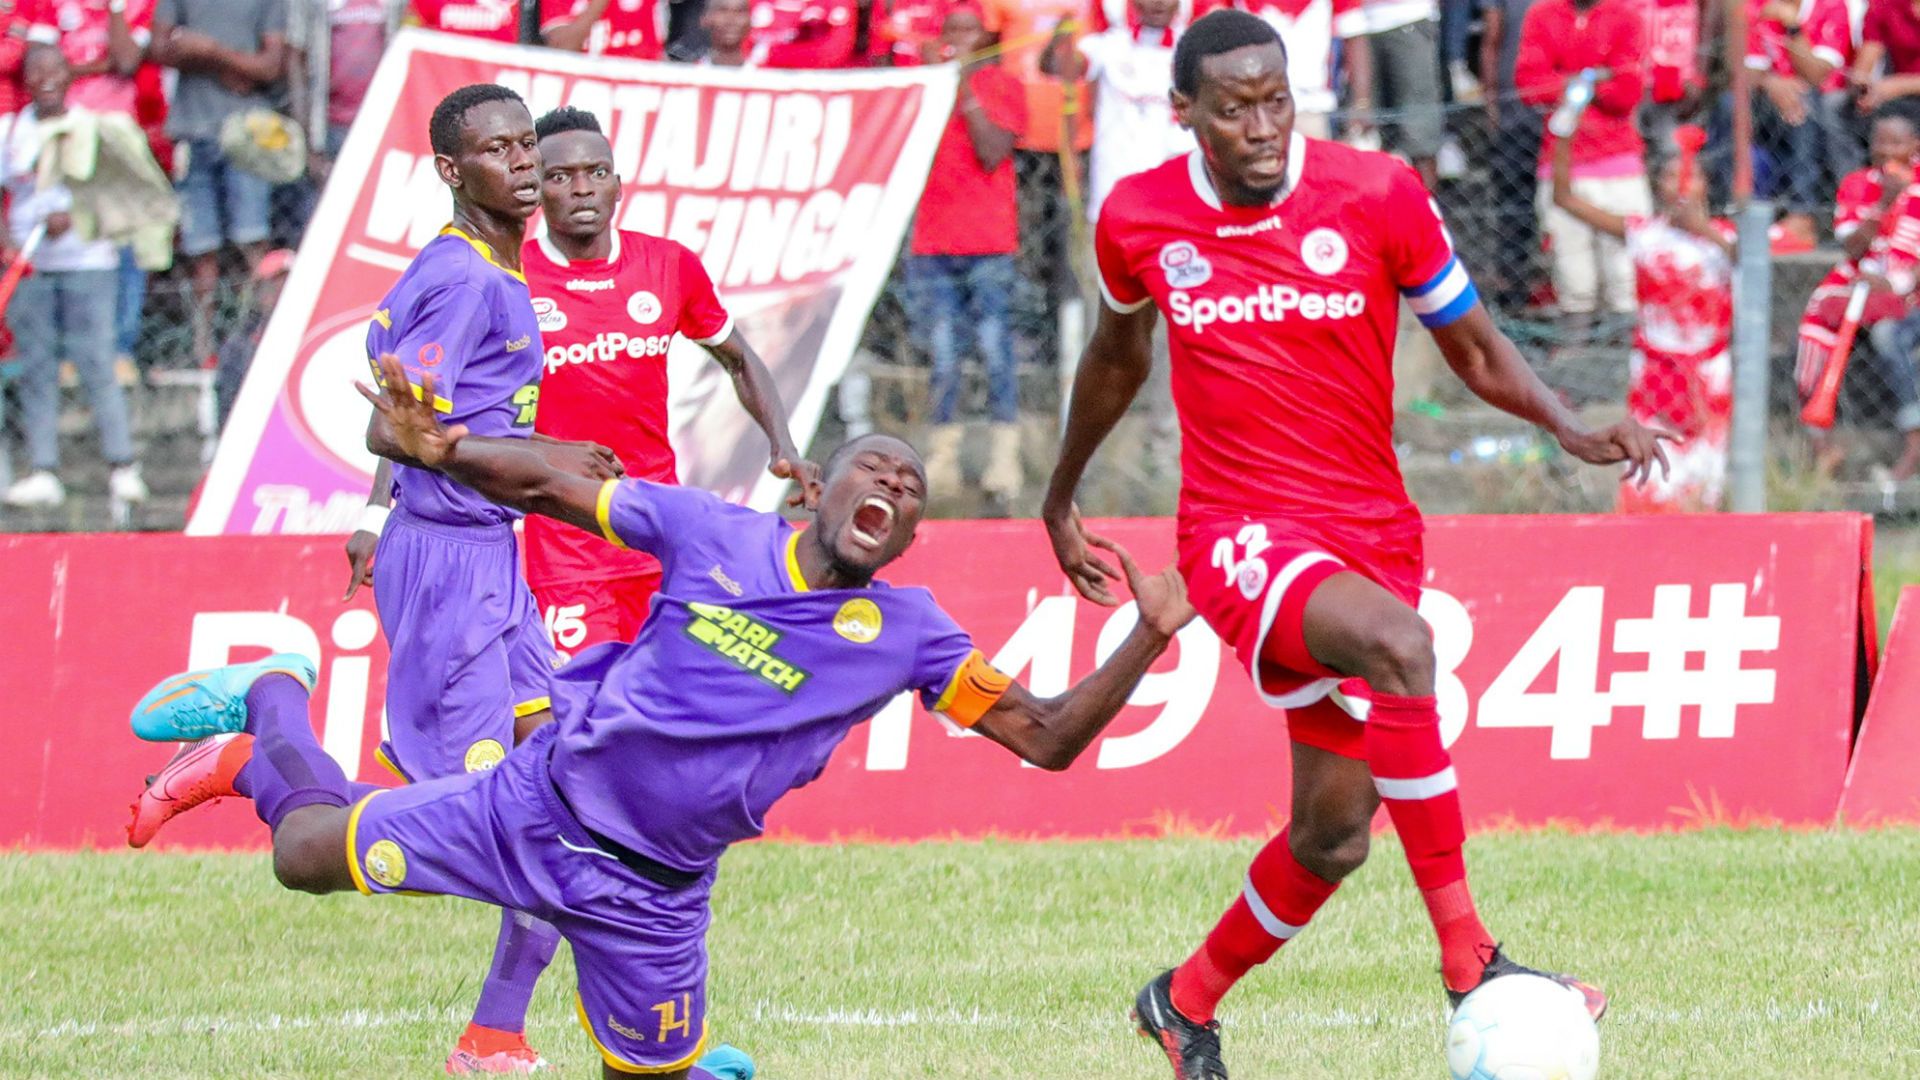 KMC vs Dodoma Jiji: Prediction, Odds Betting Tips and How to Watch | 15/11/2022